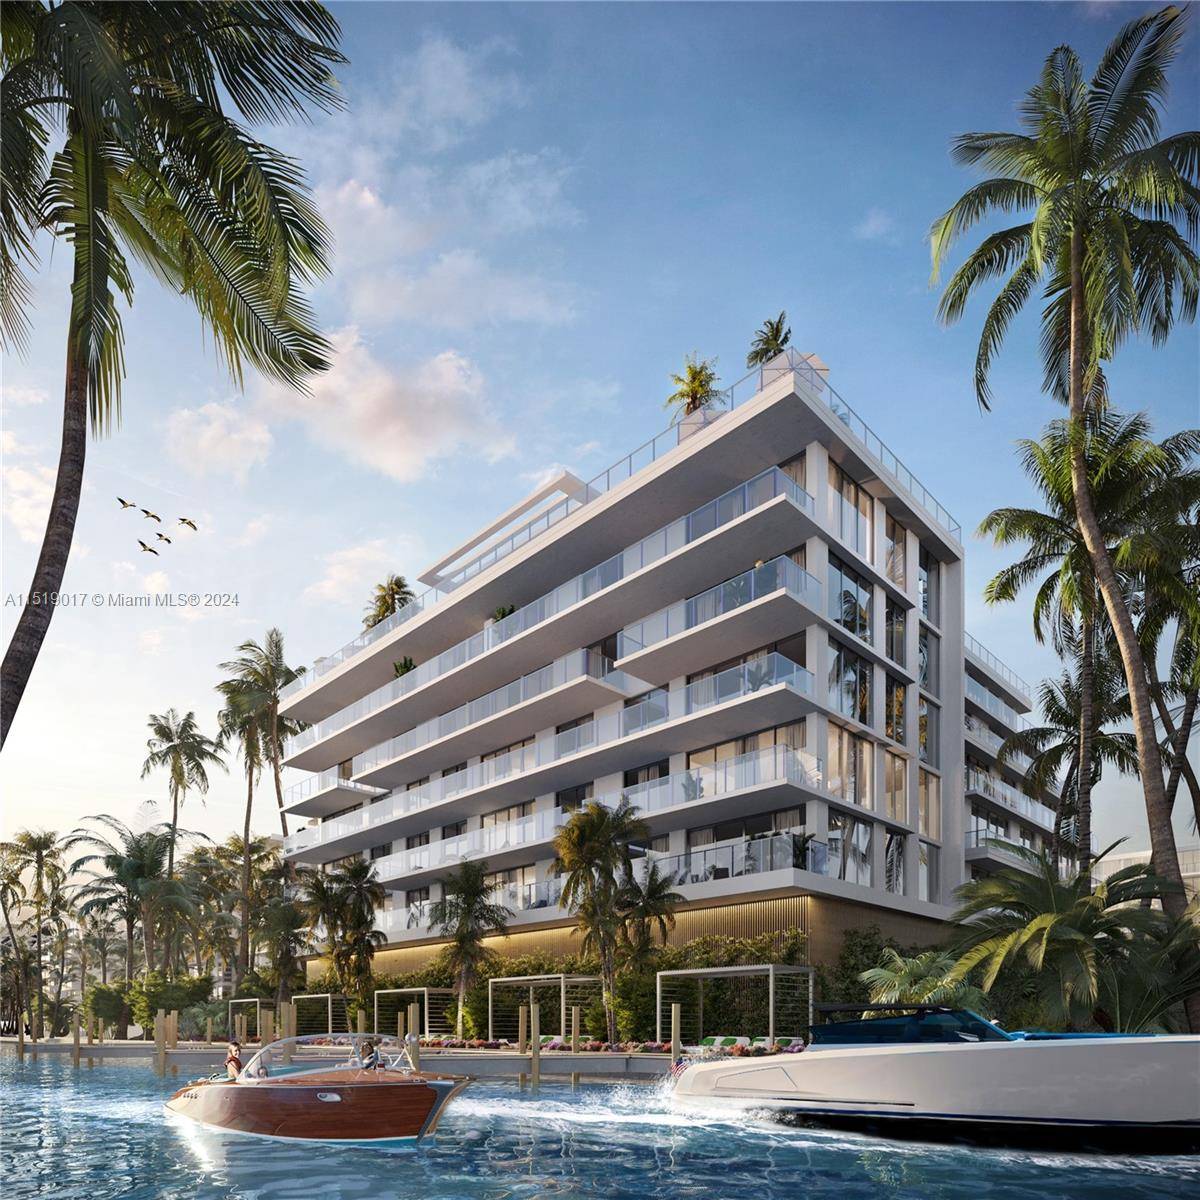 Origin Residences by Artefacto is a luxurious new development located in Bay Harbor Islands, Miami.